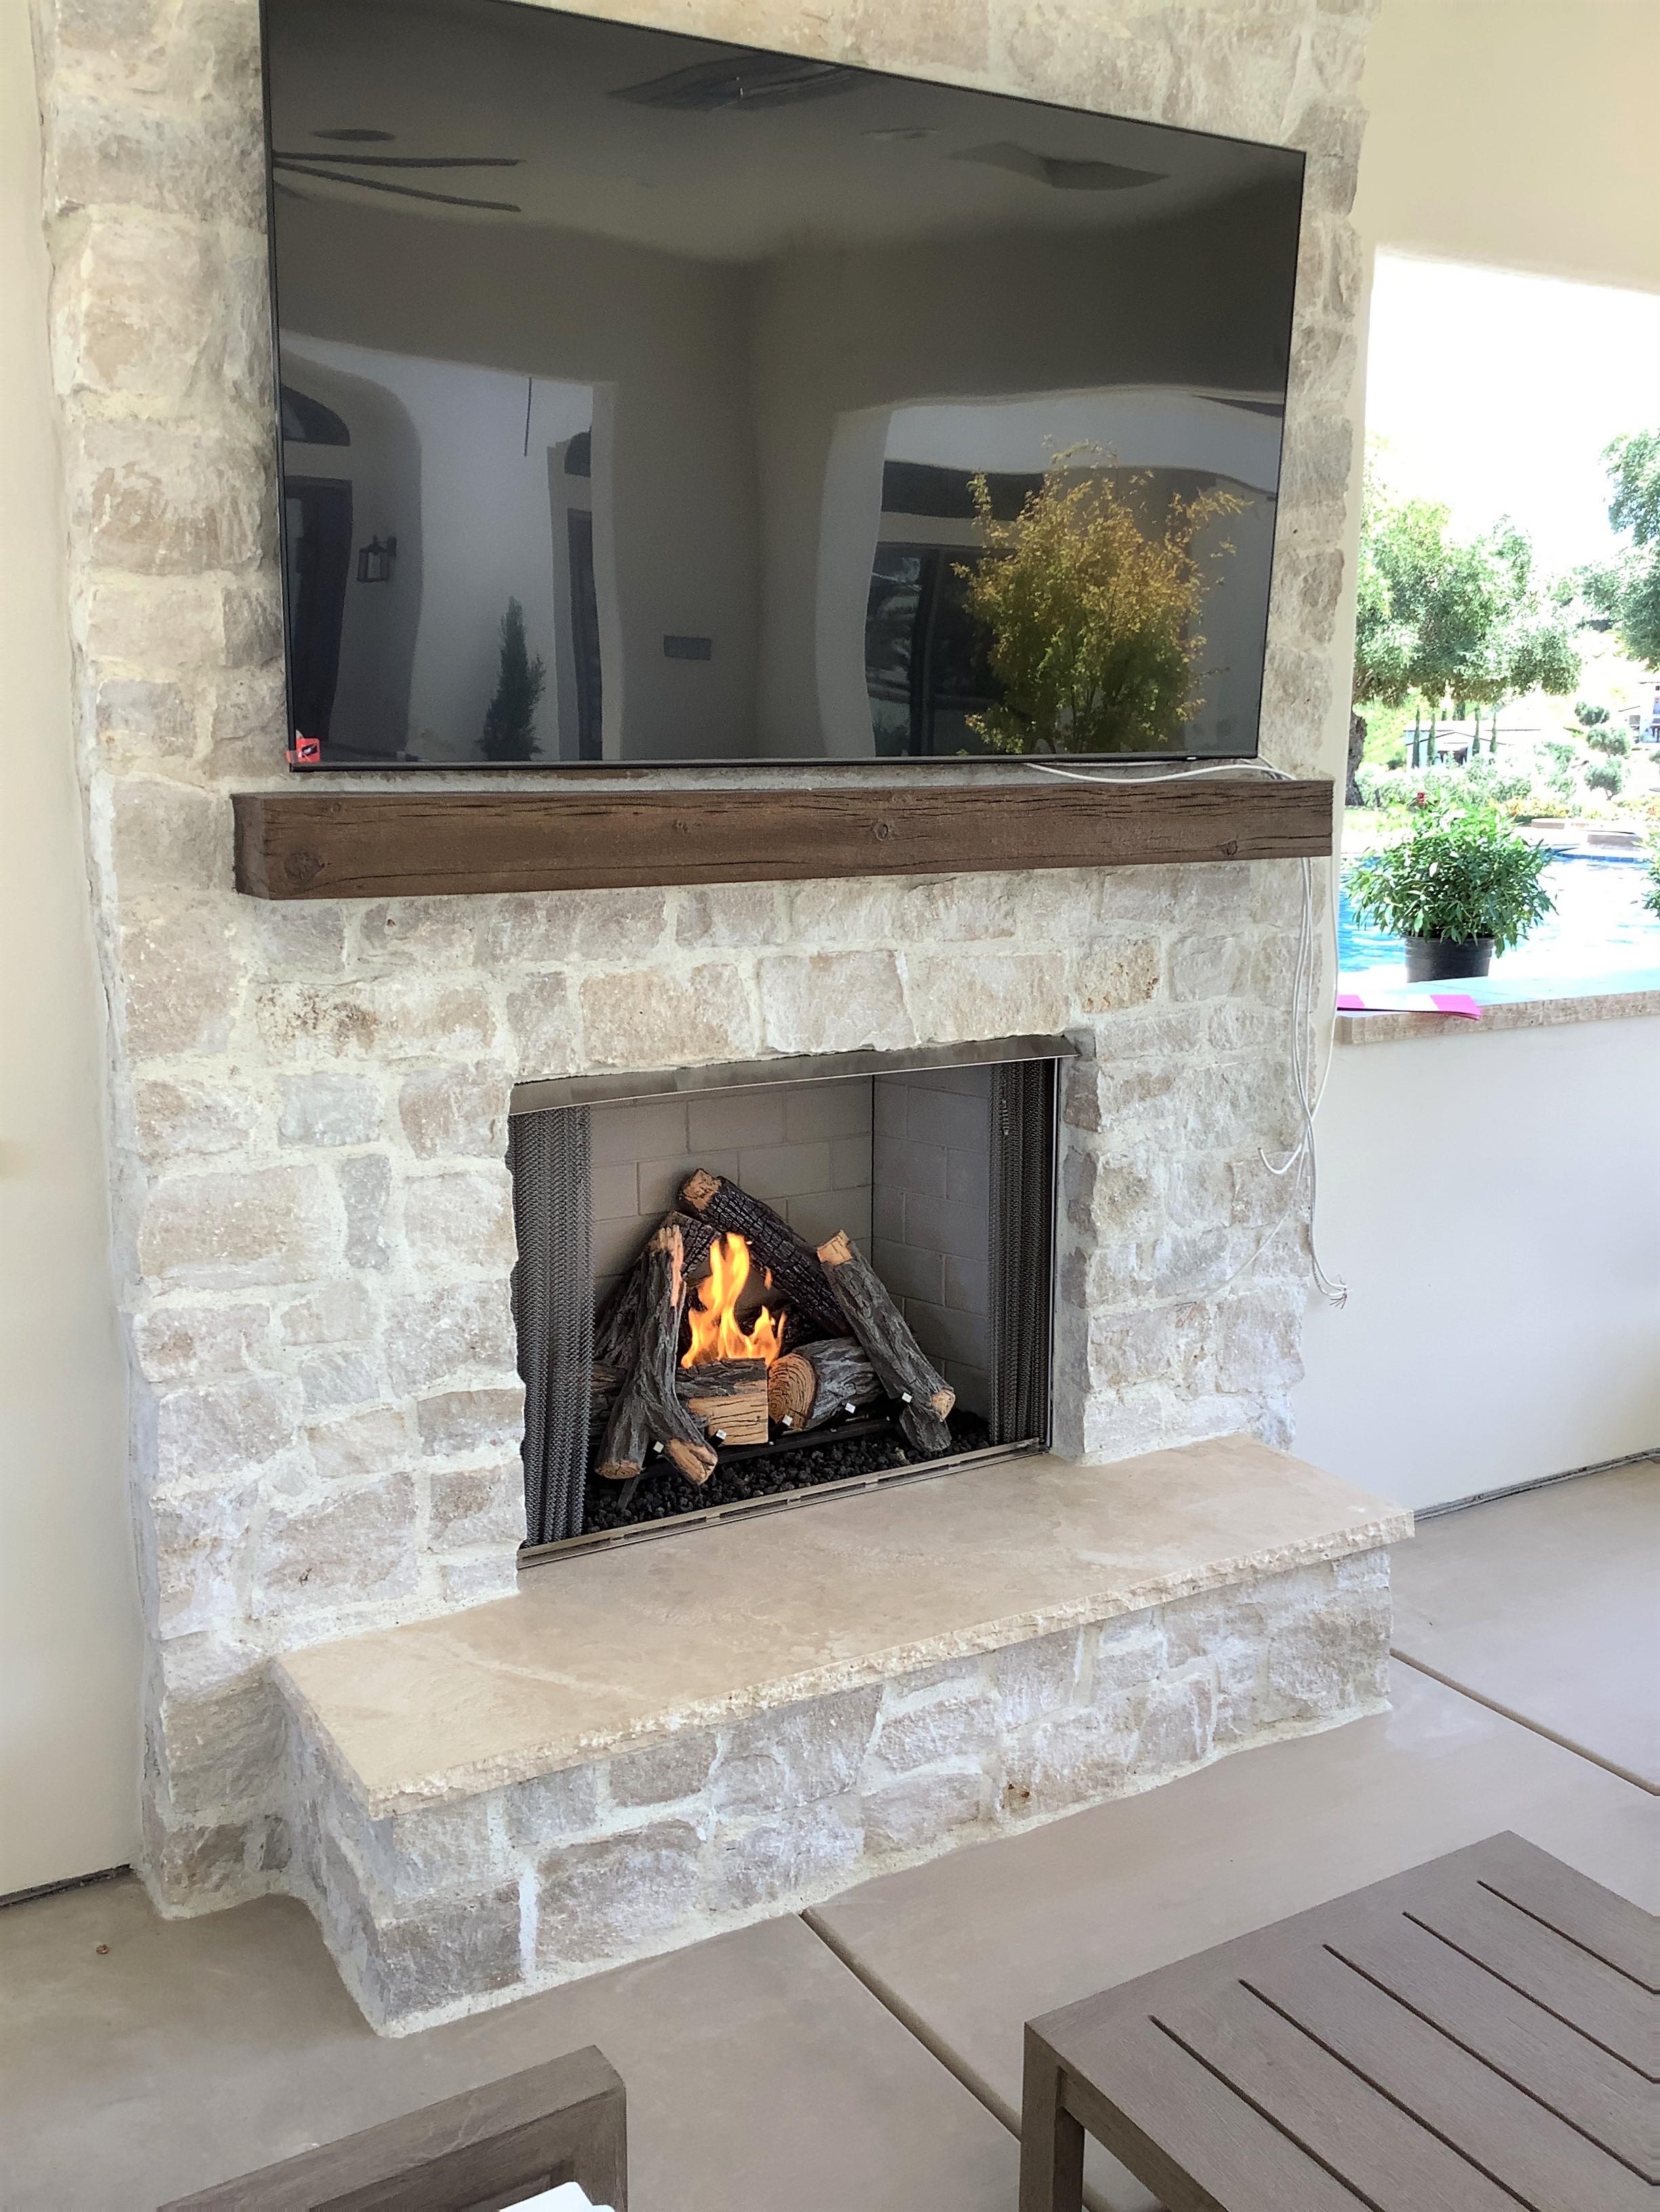 A stone outdoor fireplace done by Pacific Hearth & Home in Rancho Cordova, CA